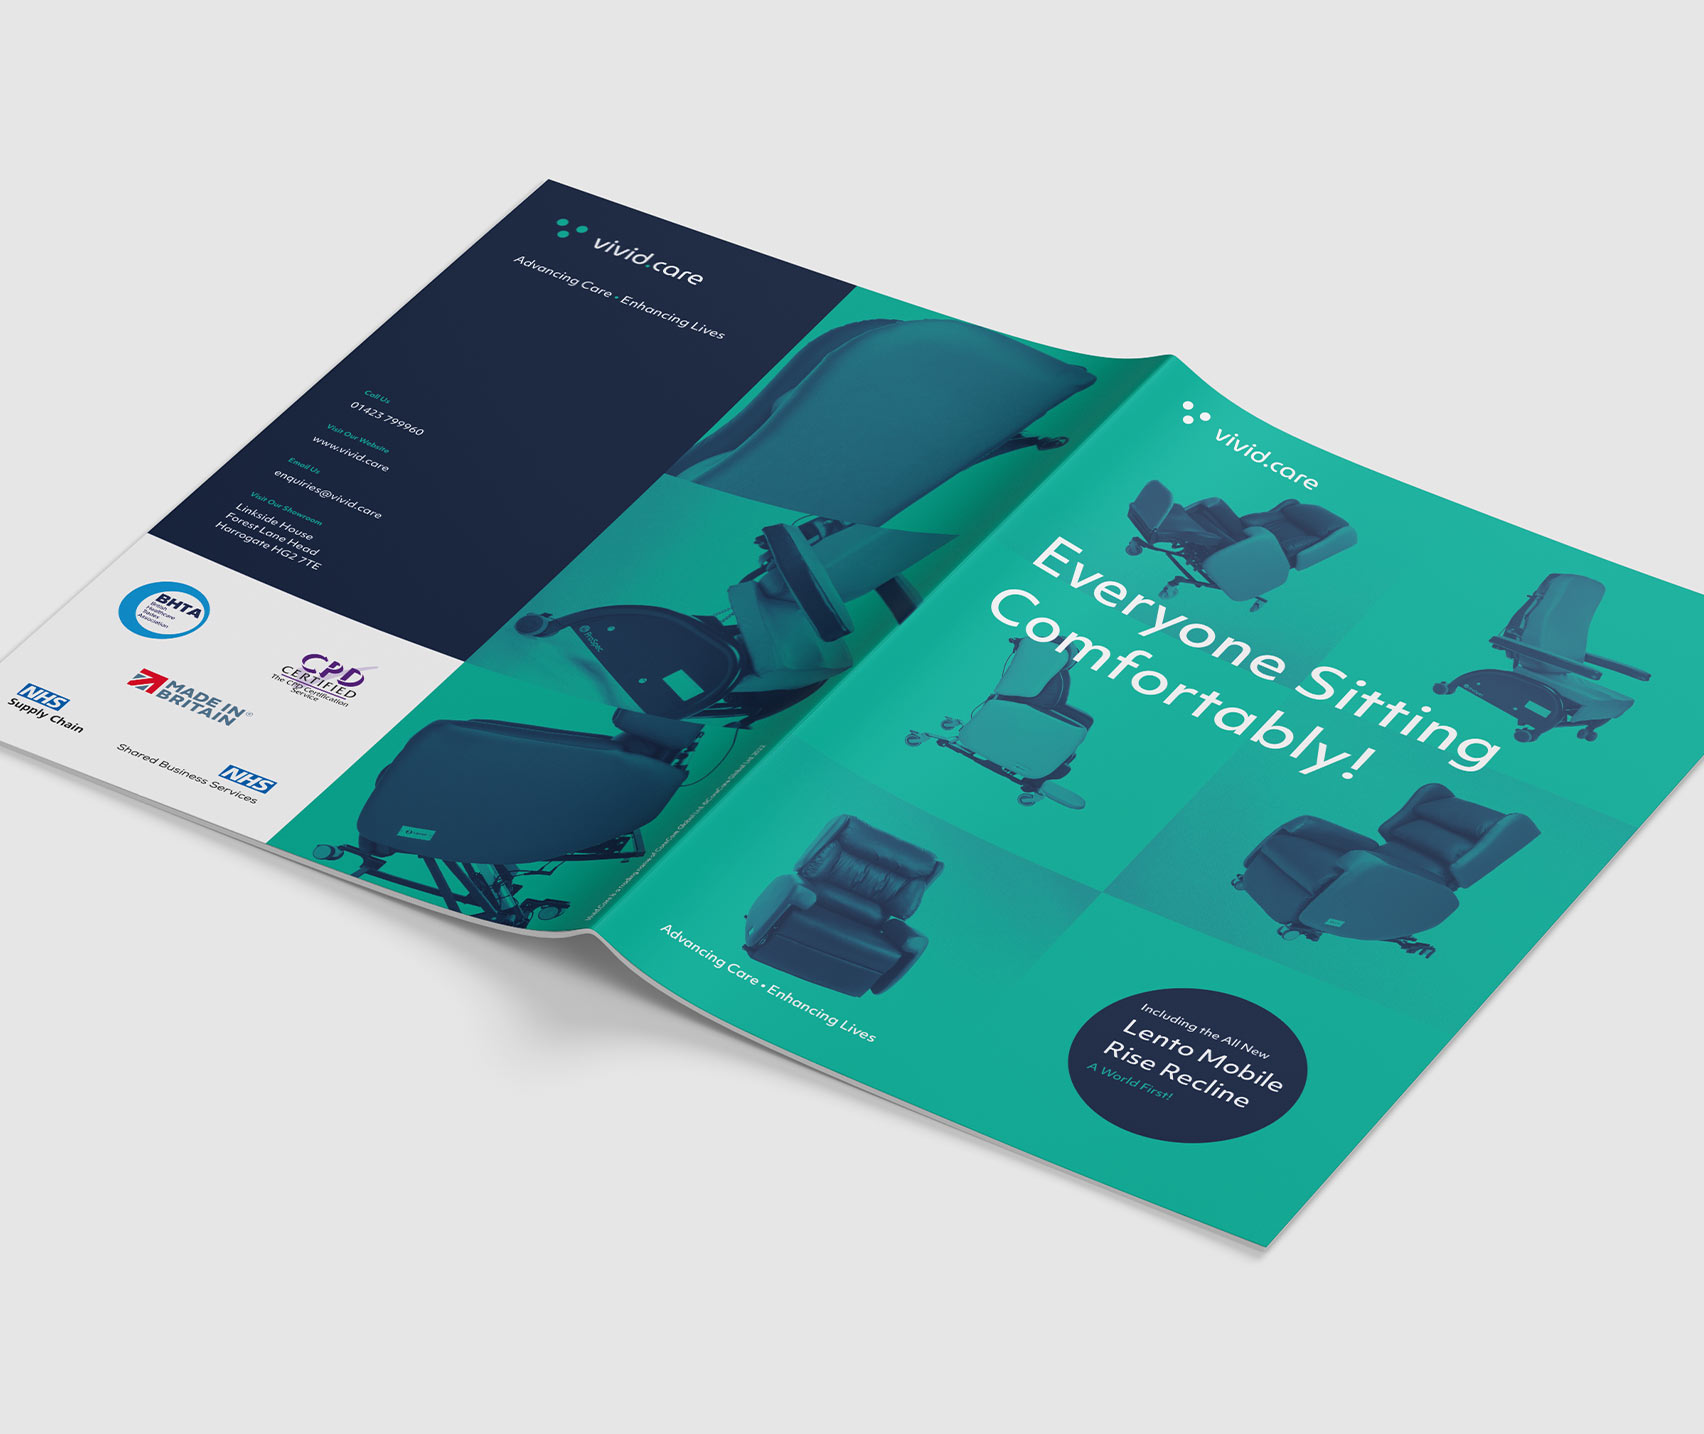 Specialist Seating brochure covers